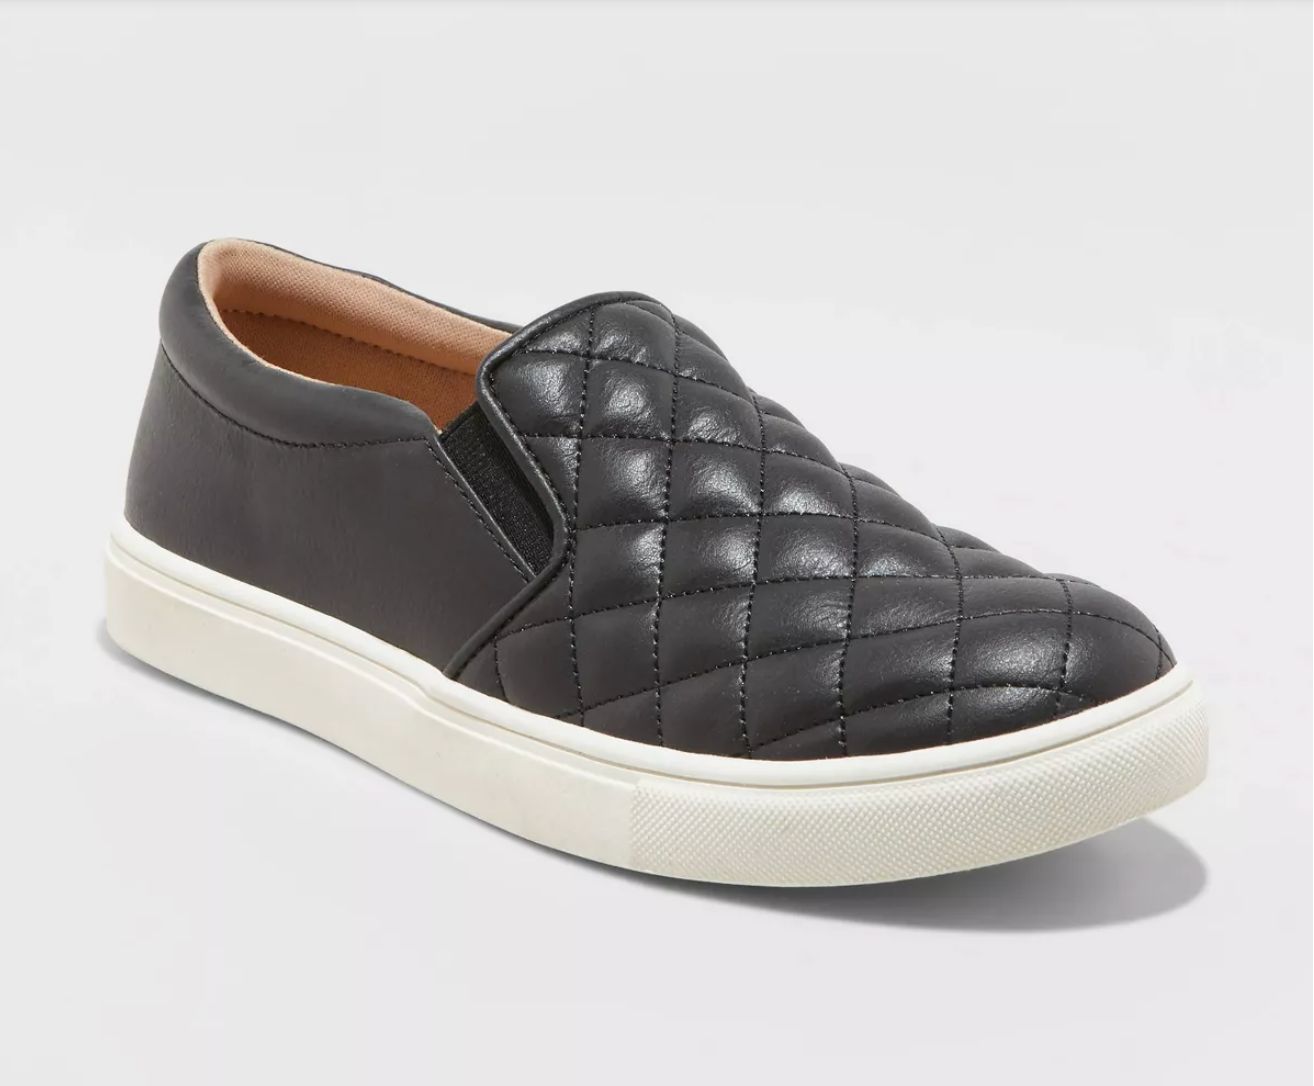 A black quilted leather slip-on sneaker